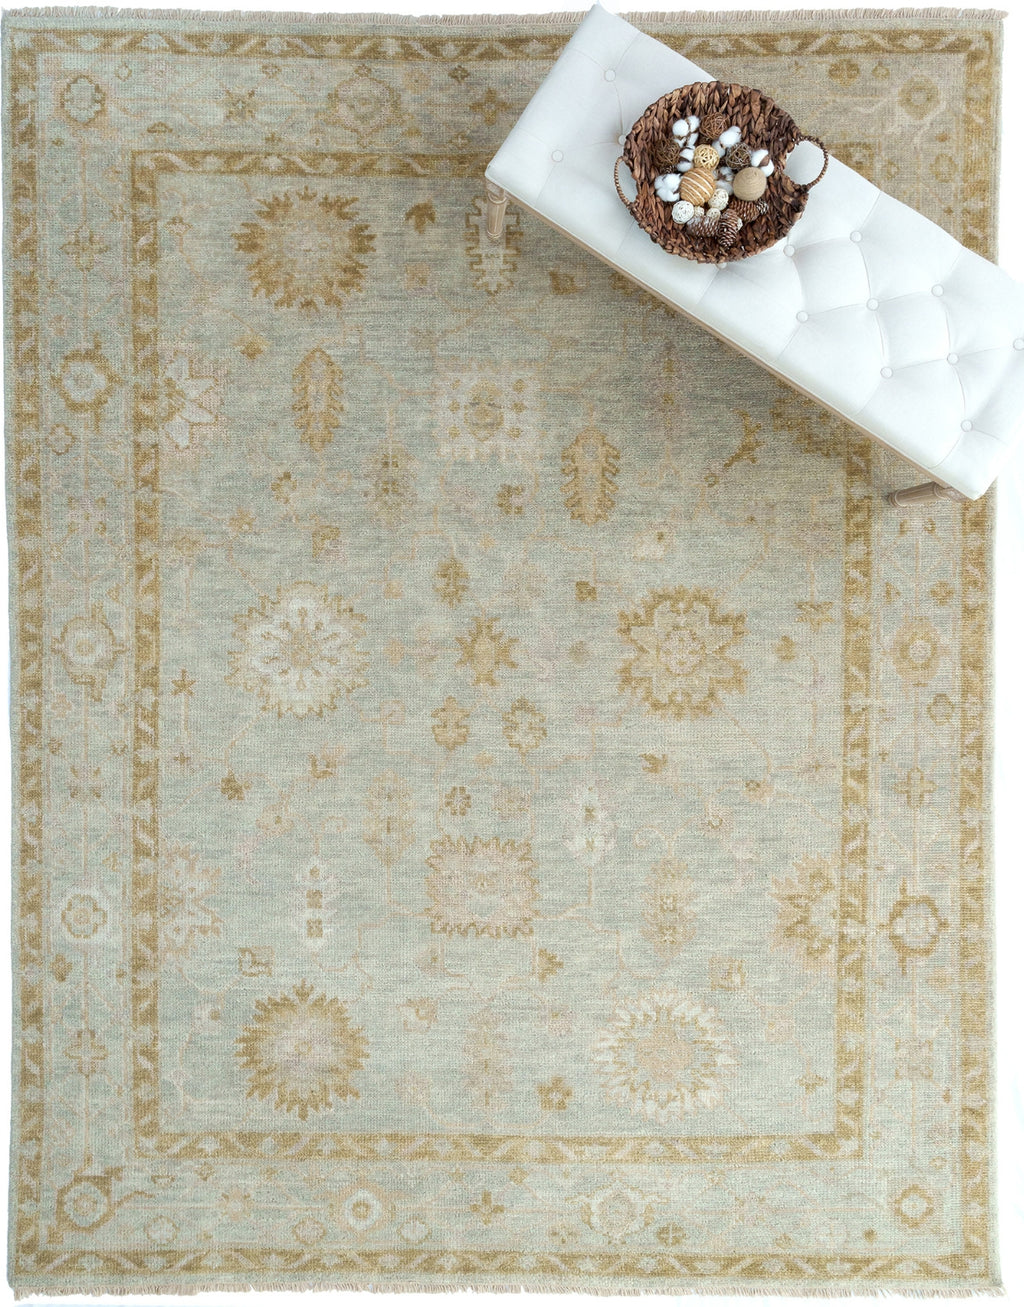 Capel Wentworth-Sutton 1228 Fawn Area Rug Rectangle Roomshot Image 1 Feature